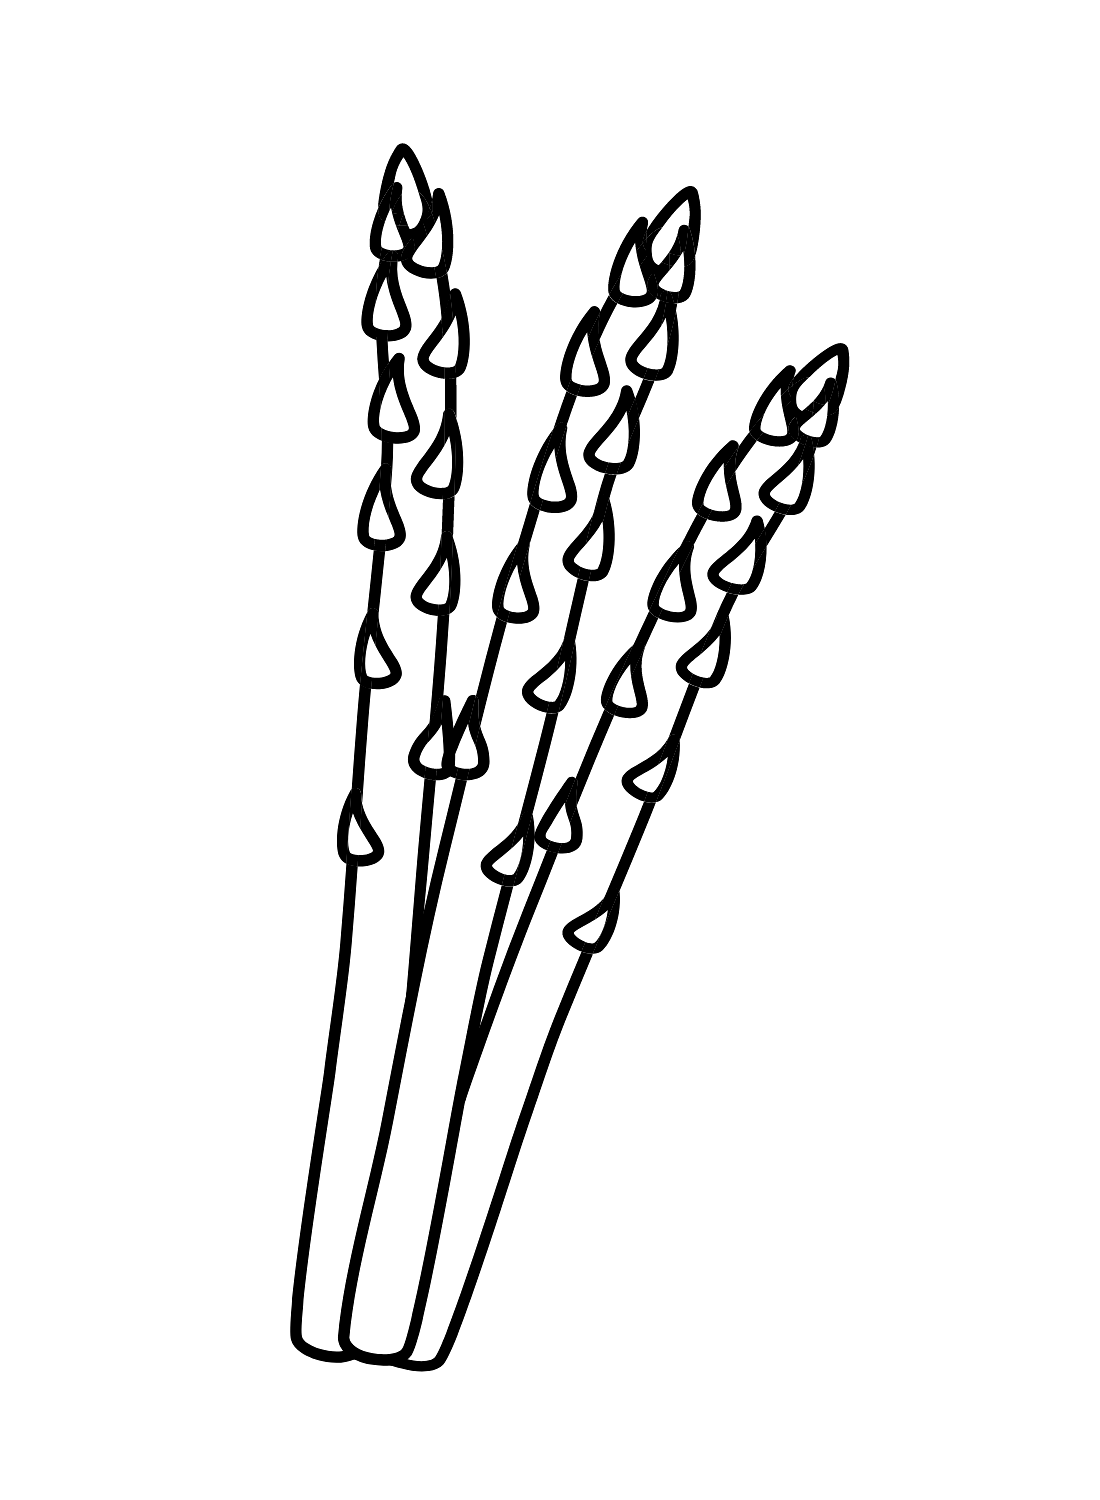 Asparagus for Kids Coloring Page